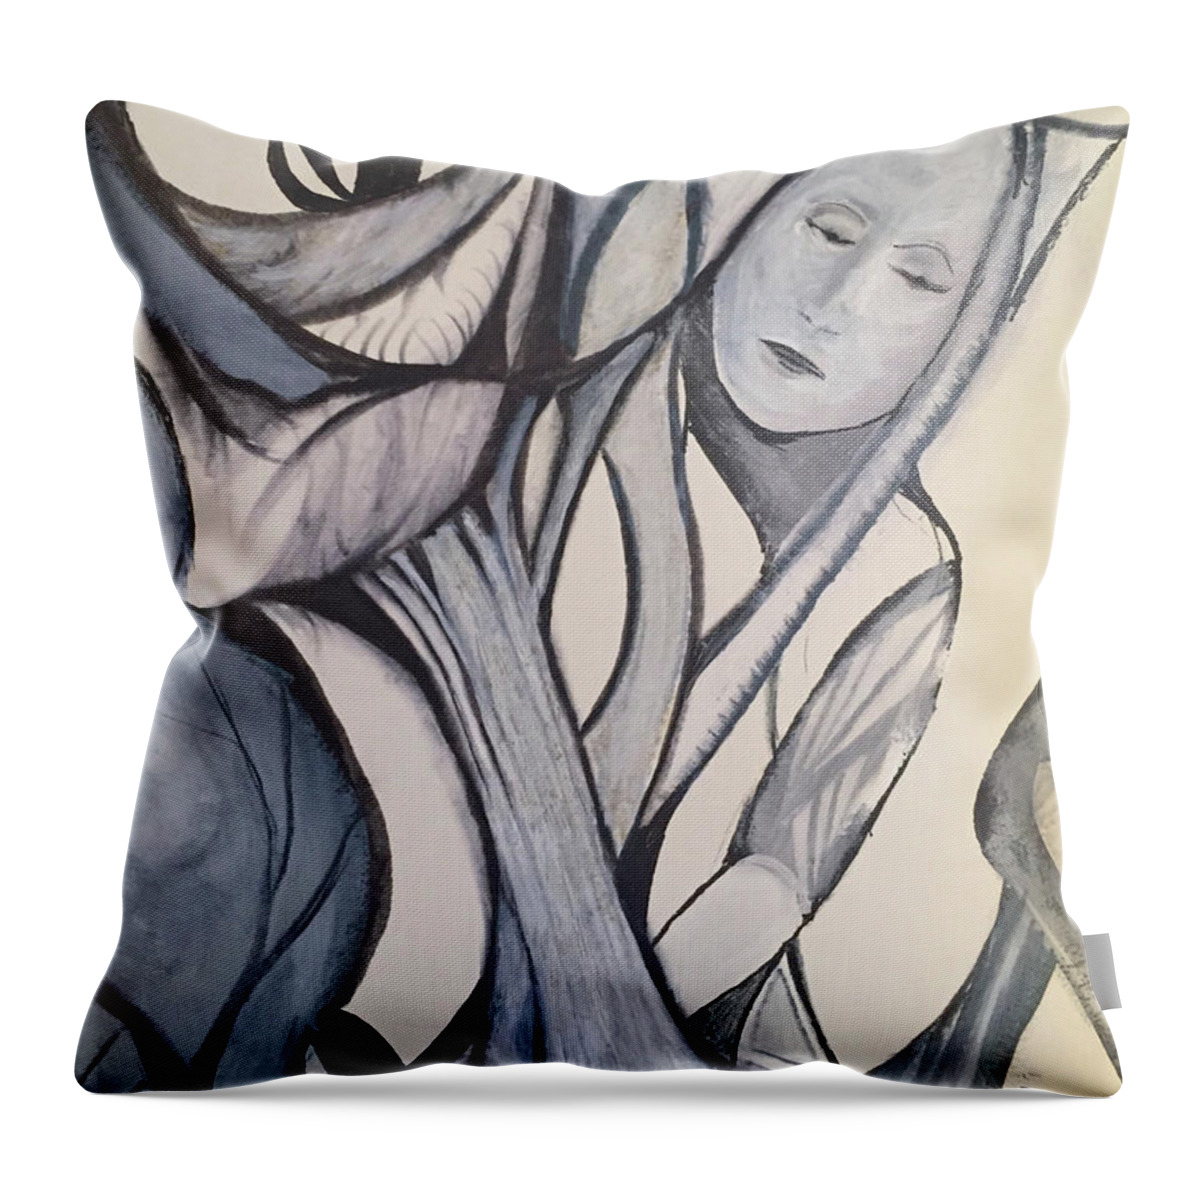 Contemporary Expressionist Drawing Throw Pillow featuring the drawing Tree Angel by Dennis Ellman